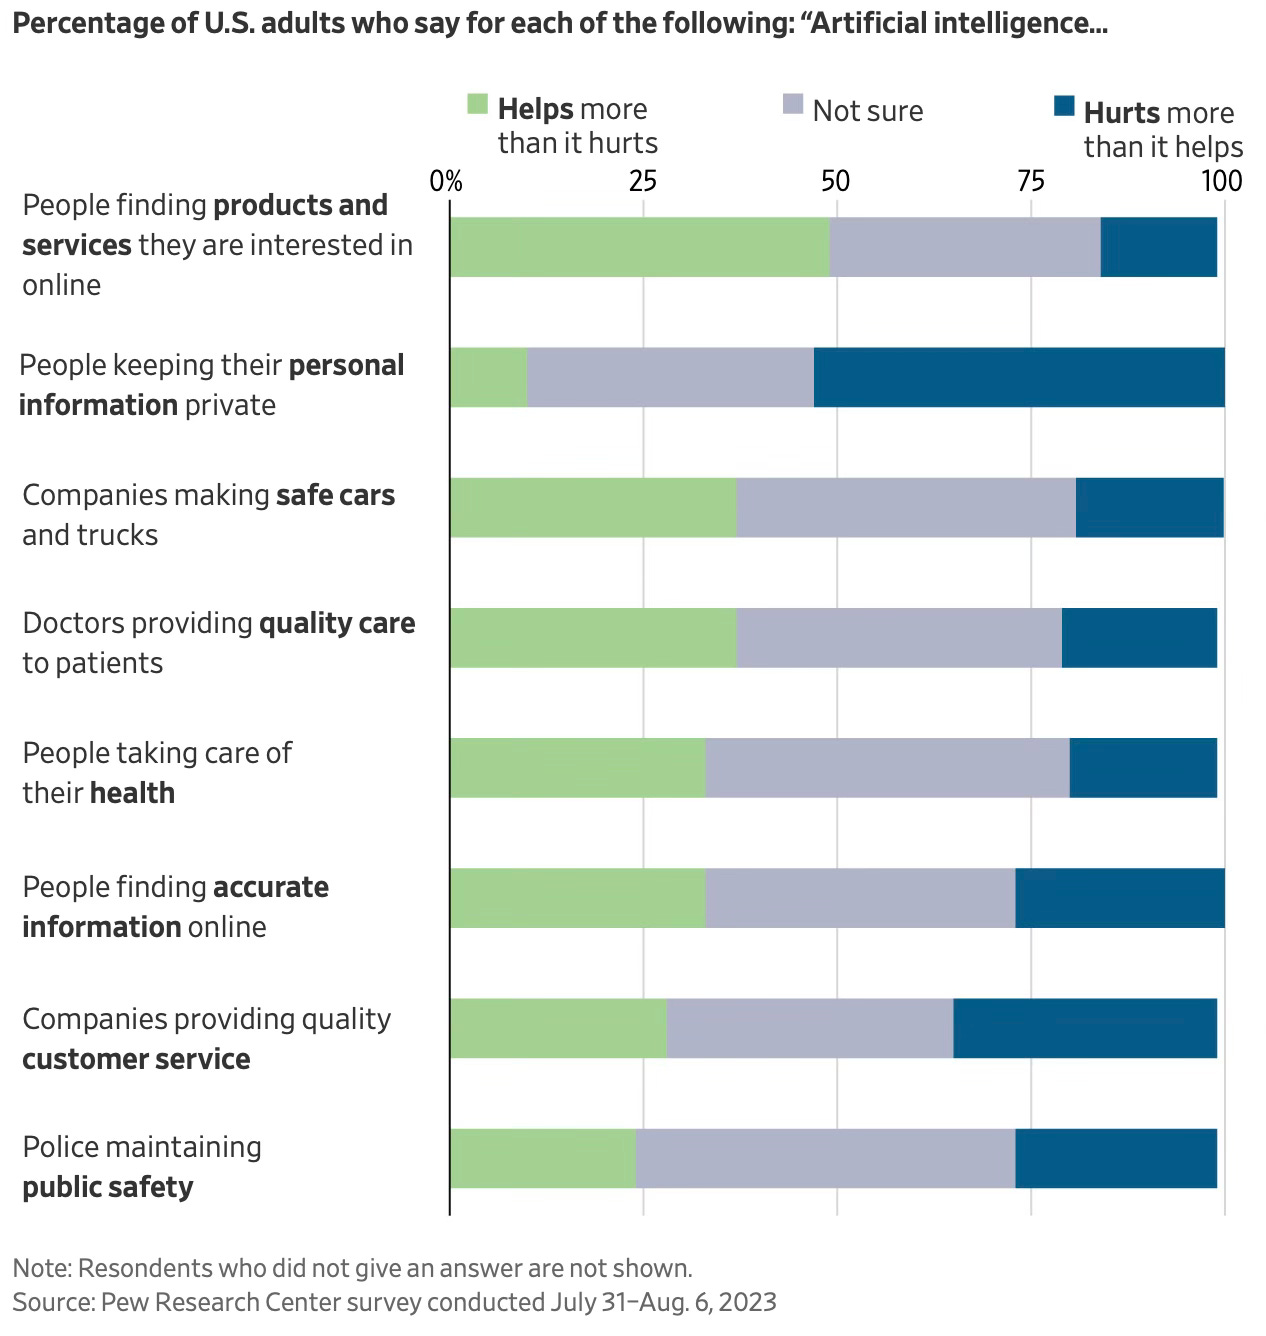 chart show public sentiment on whether artificial intelligence helps more than it hurts on issues like finding products and services online, making cars safe, etc.